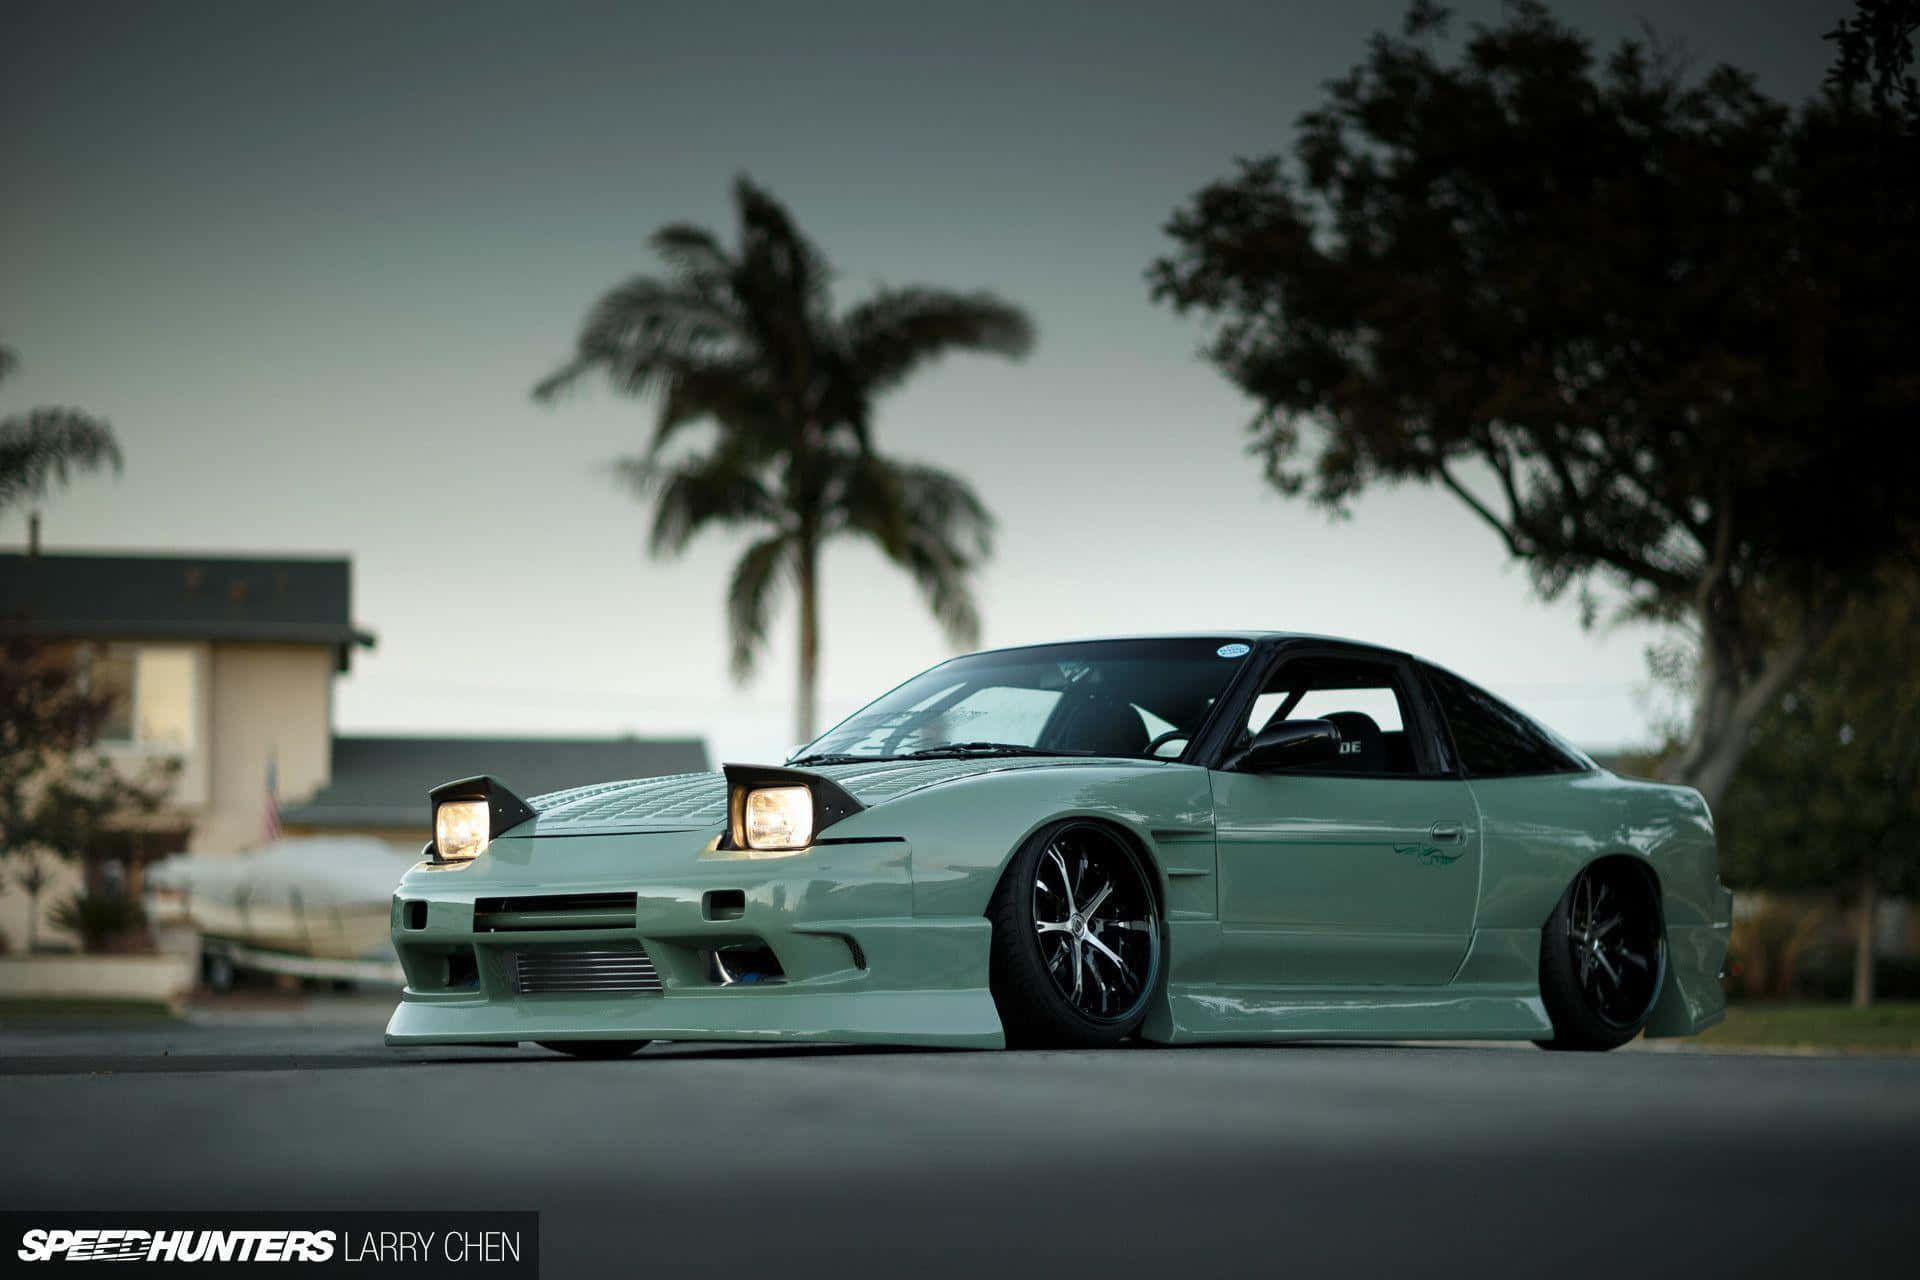 Graceful yet Powerful, the Nissan Silvia S13 Wallpaper